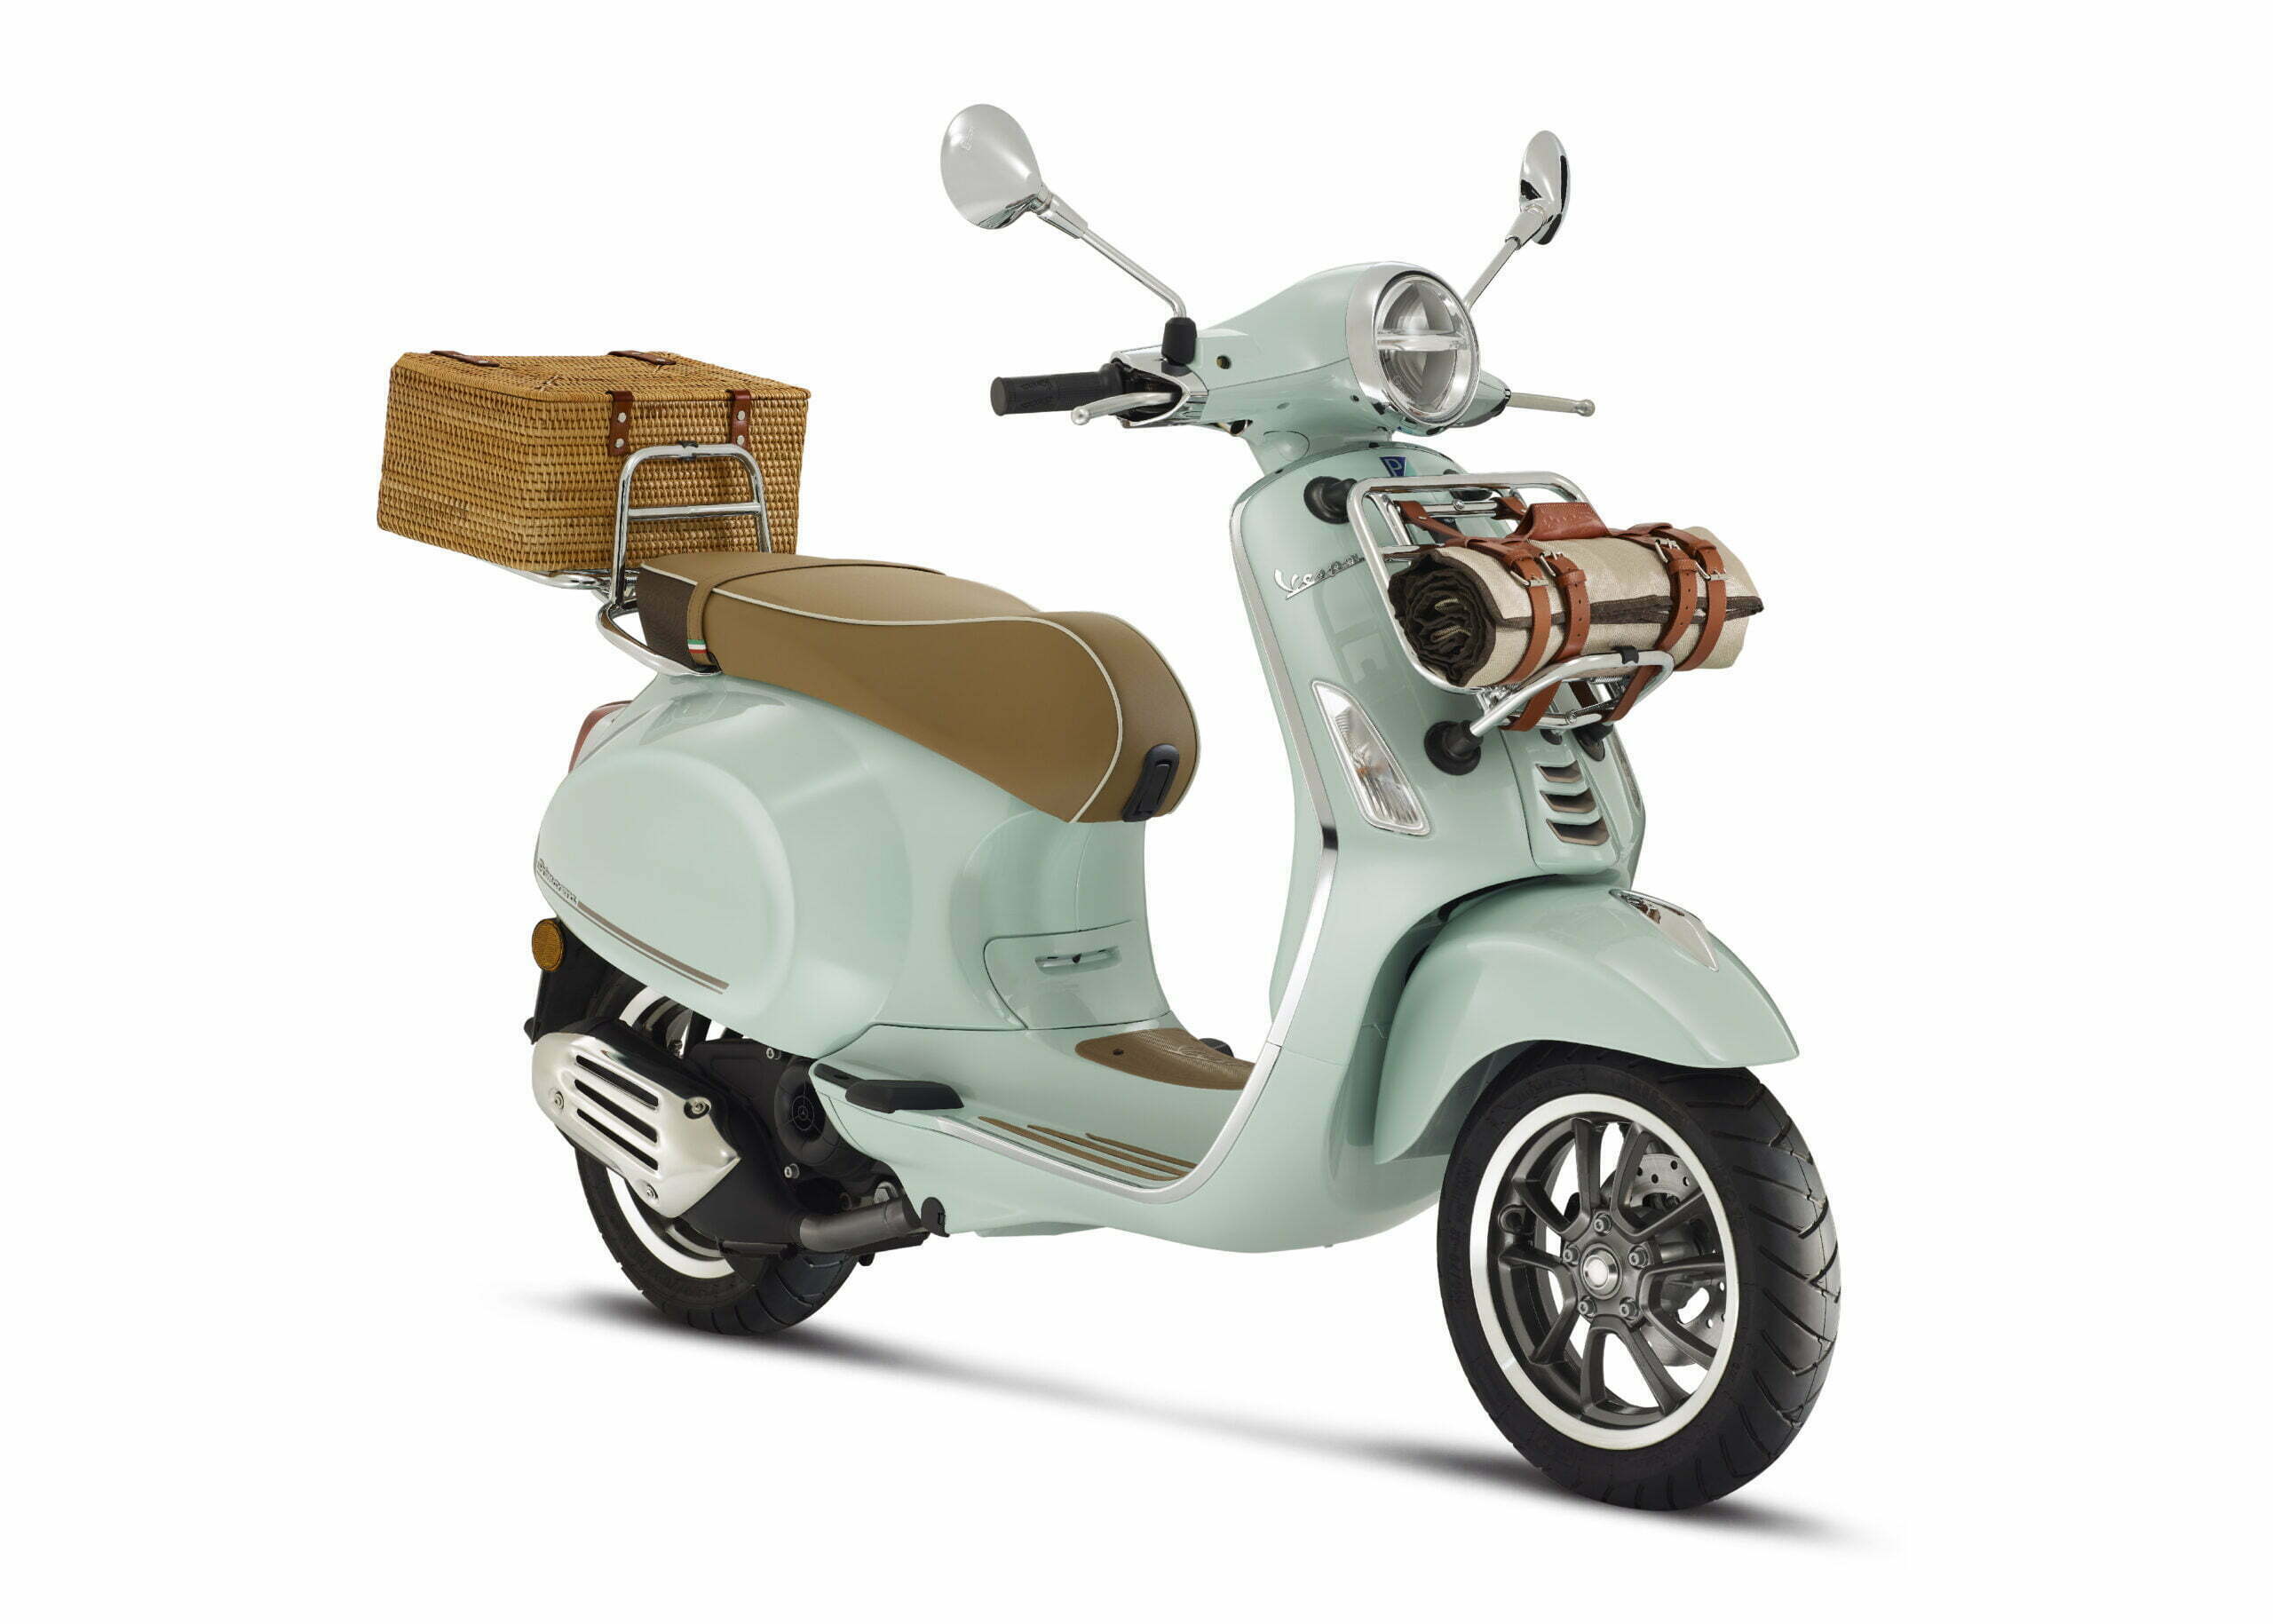 New 2022 Vespa Pic Nic Scooter Revealed (1)